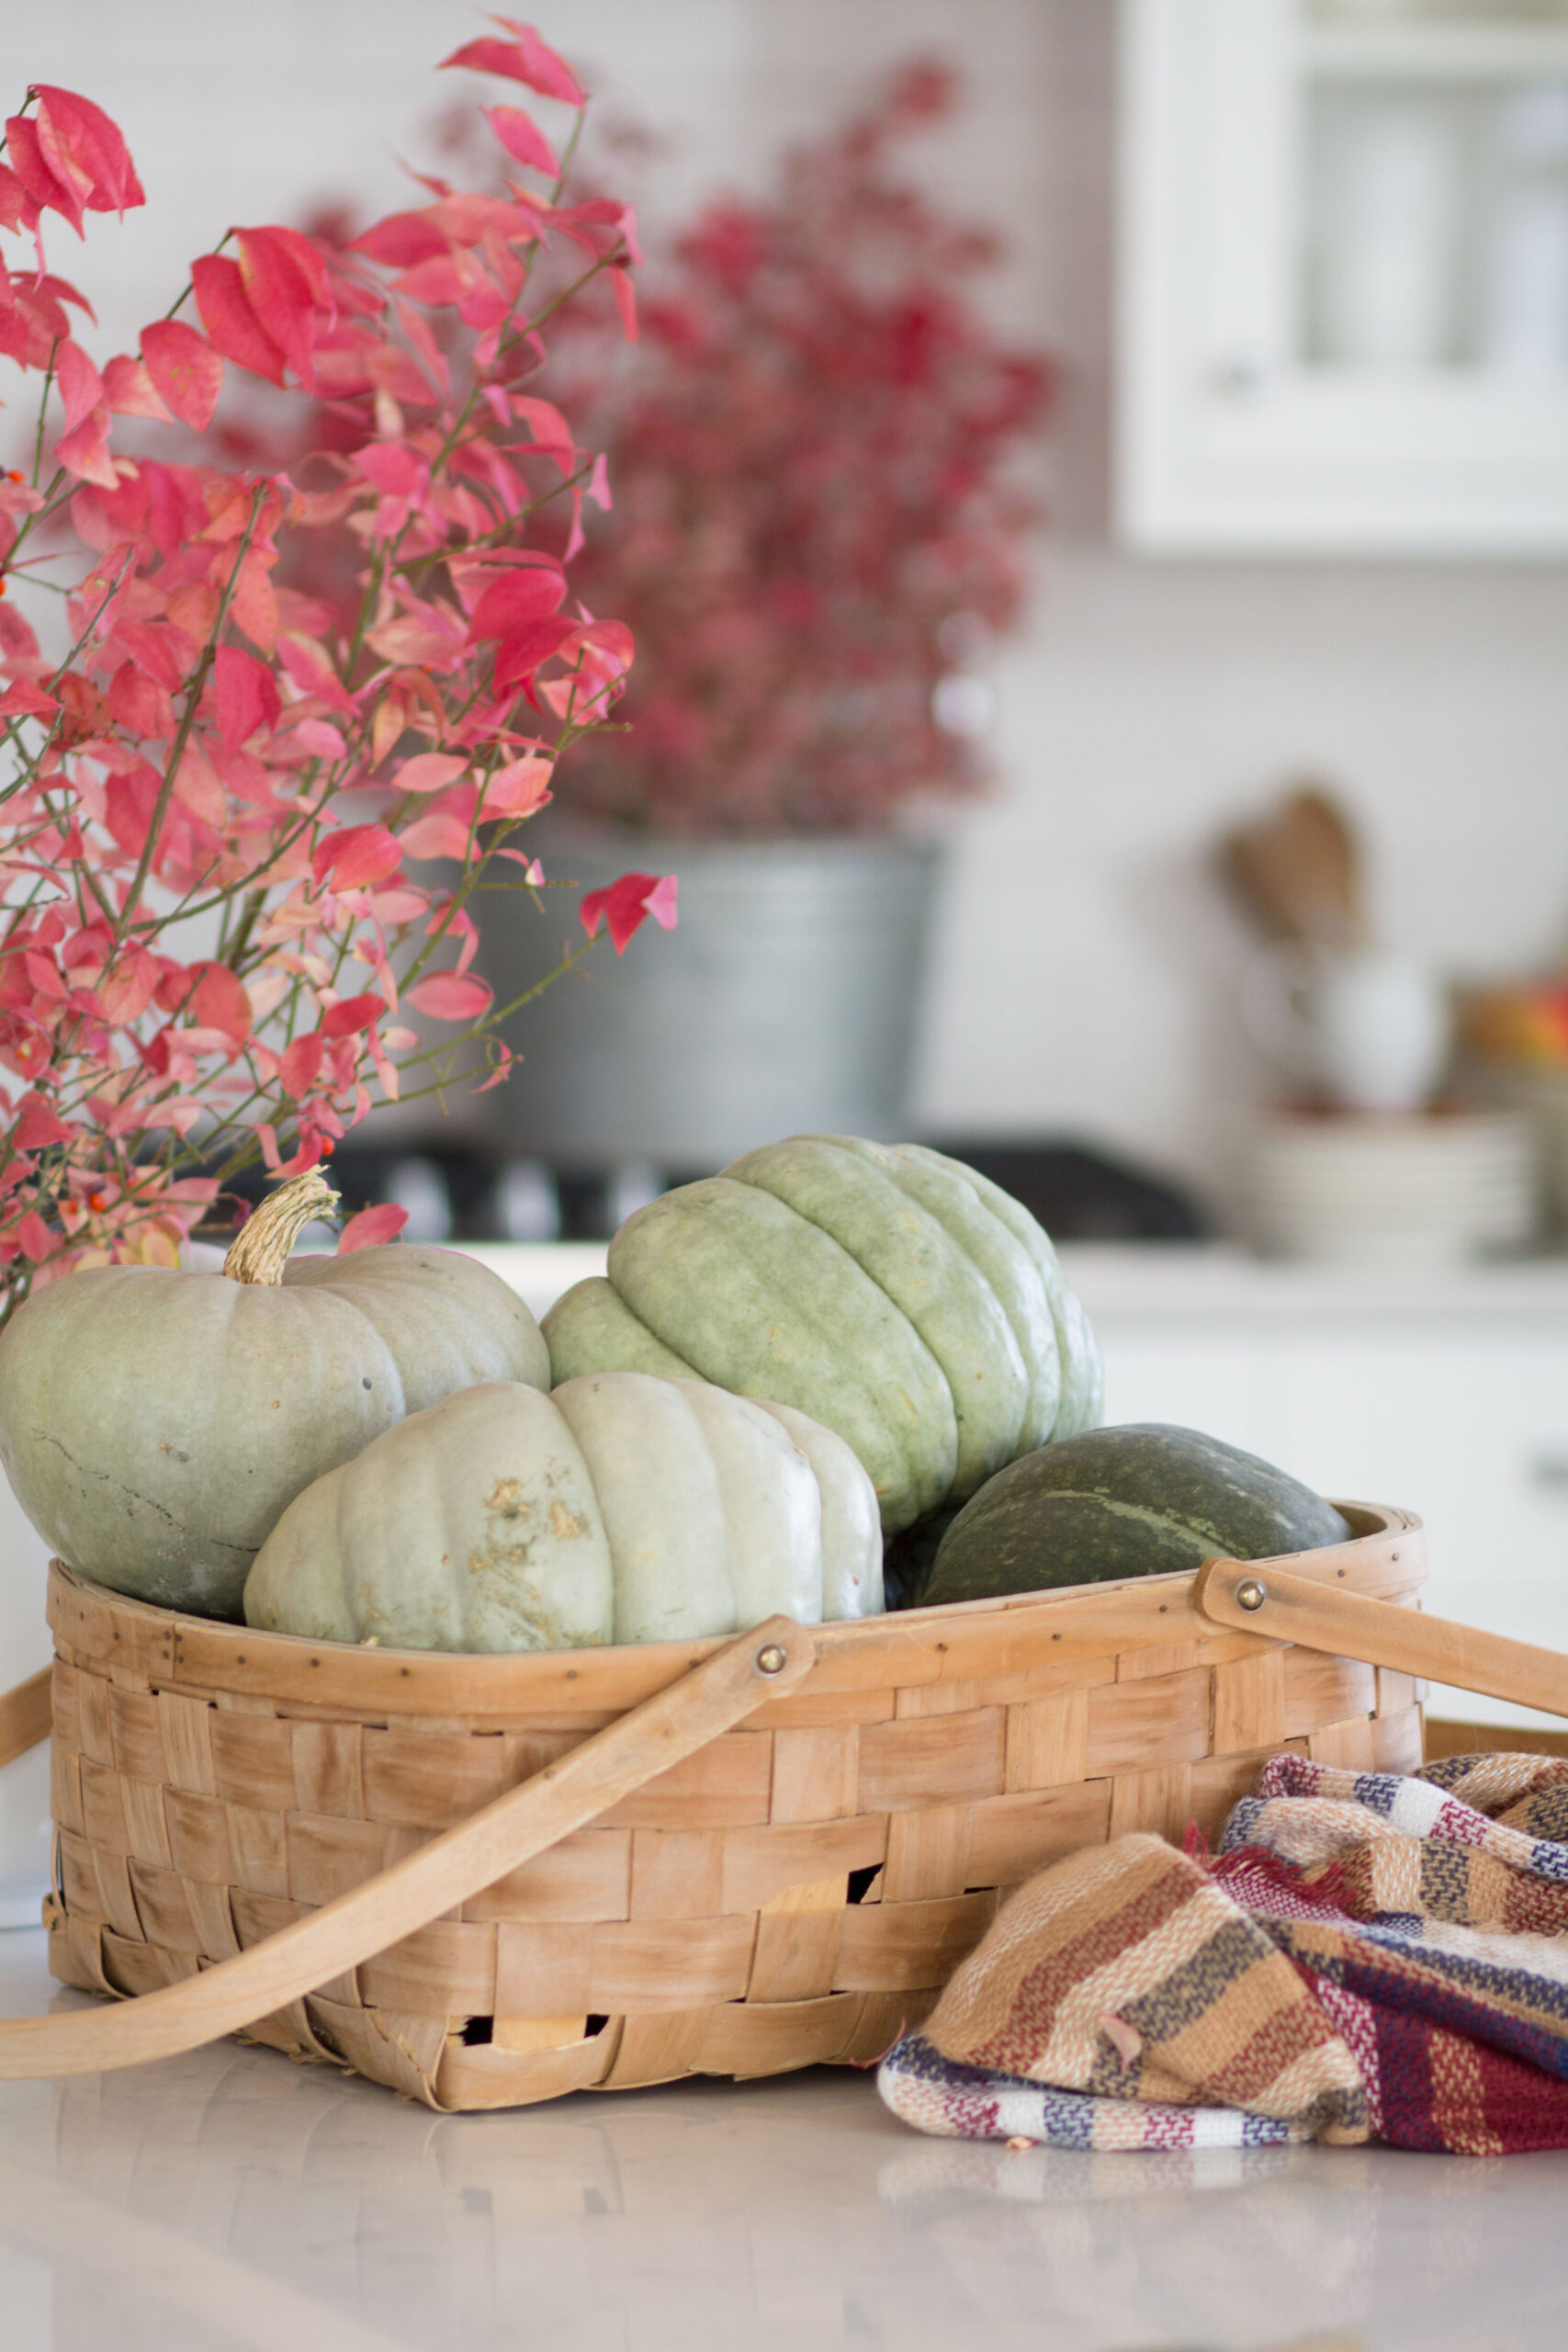 7 Inexpensive or Free Fall Decor Ideas basket of pumpkins and fall kitchen decor 